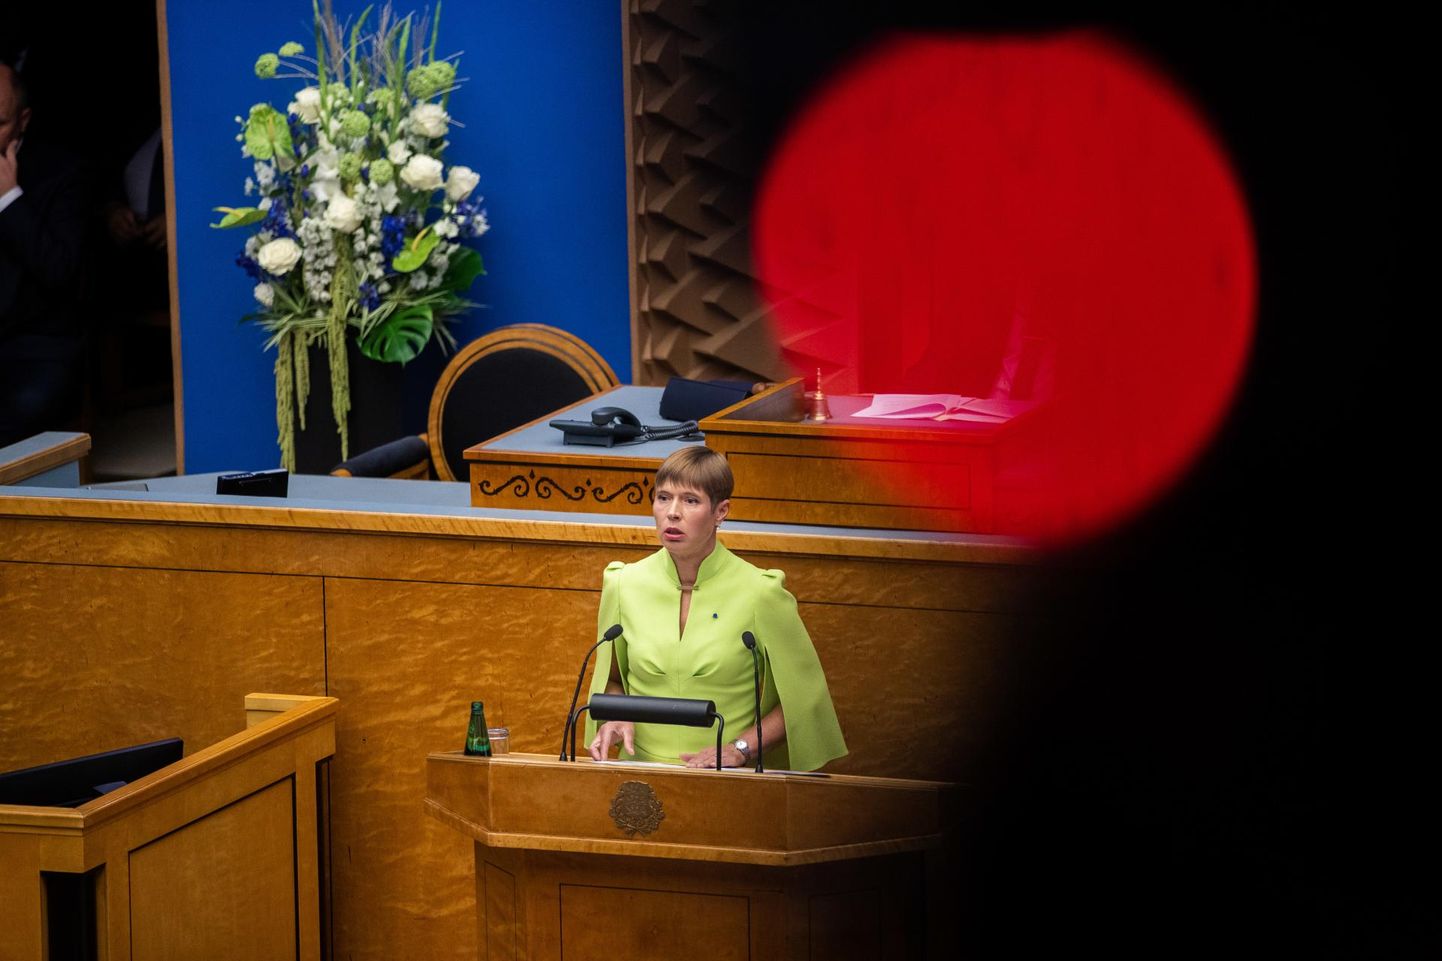 Monday marks the start of the sixth session of the XVI Riigikogu. resident Kersti Kaljulaid’s speech will be followed by bill 392 aimed at boosting independence and transparency of communications data collected in criminal proceedings.